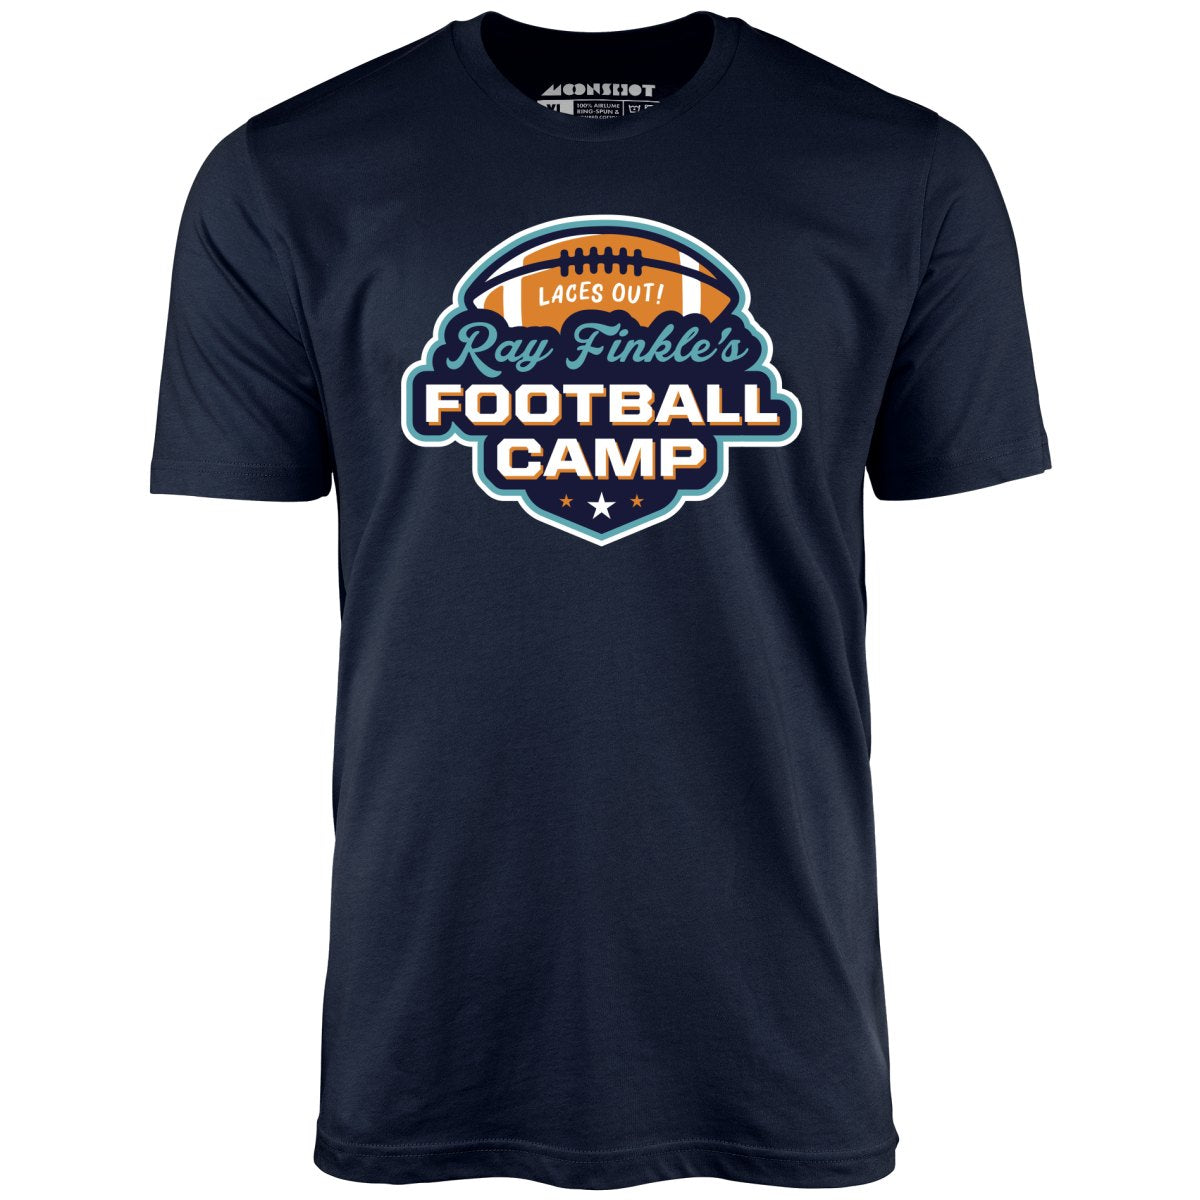 Ray Finkle's Football Camp - Unisex T-Shirt